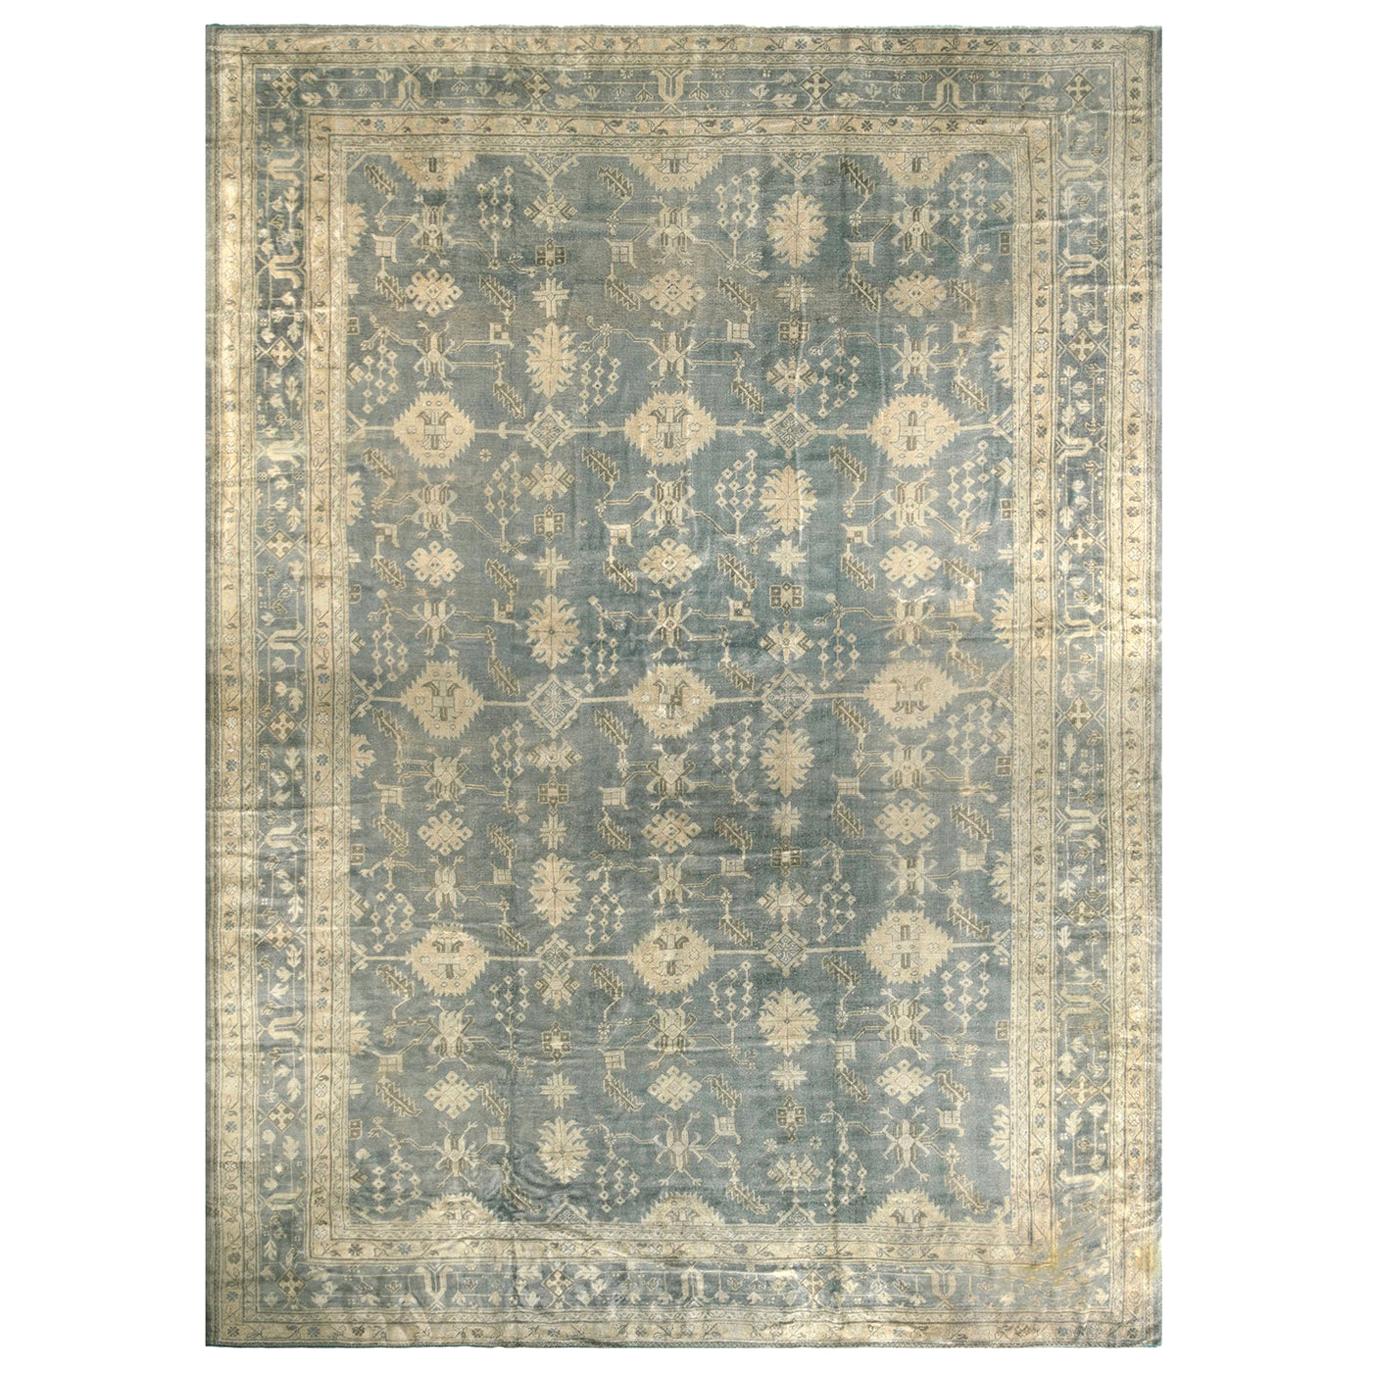 Antique Oushak Stone Blue and Tan Wool Rug